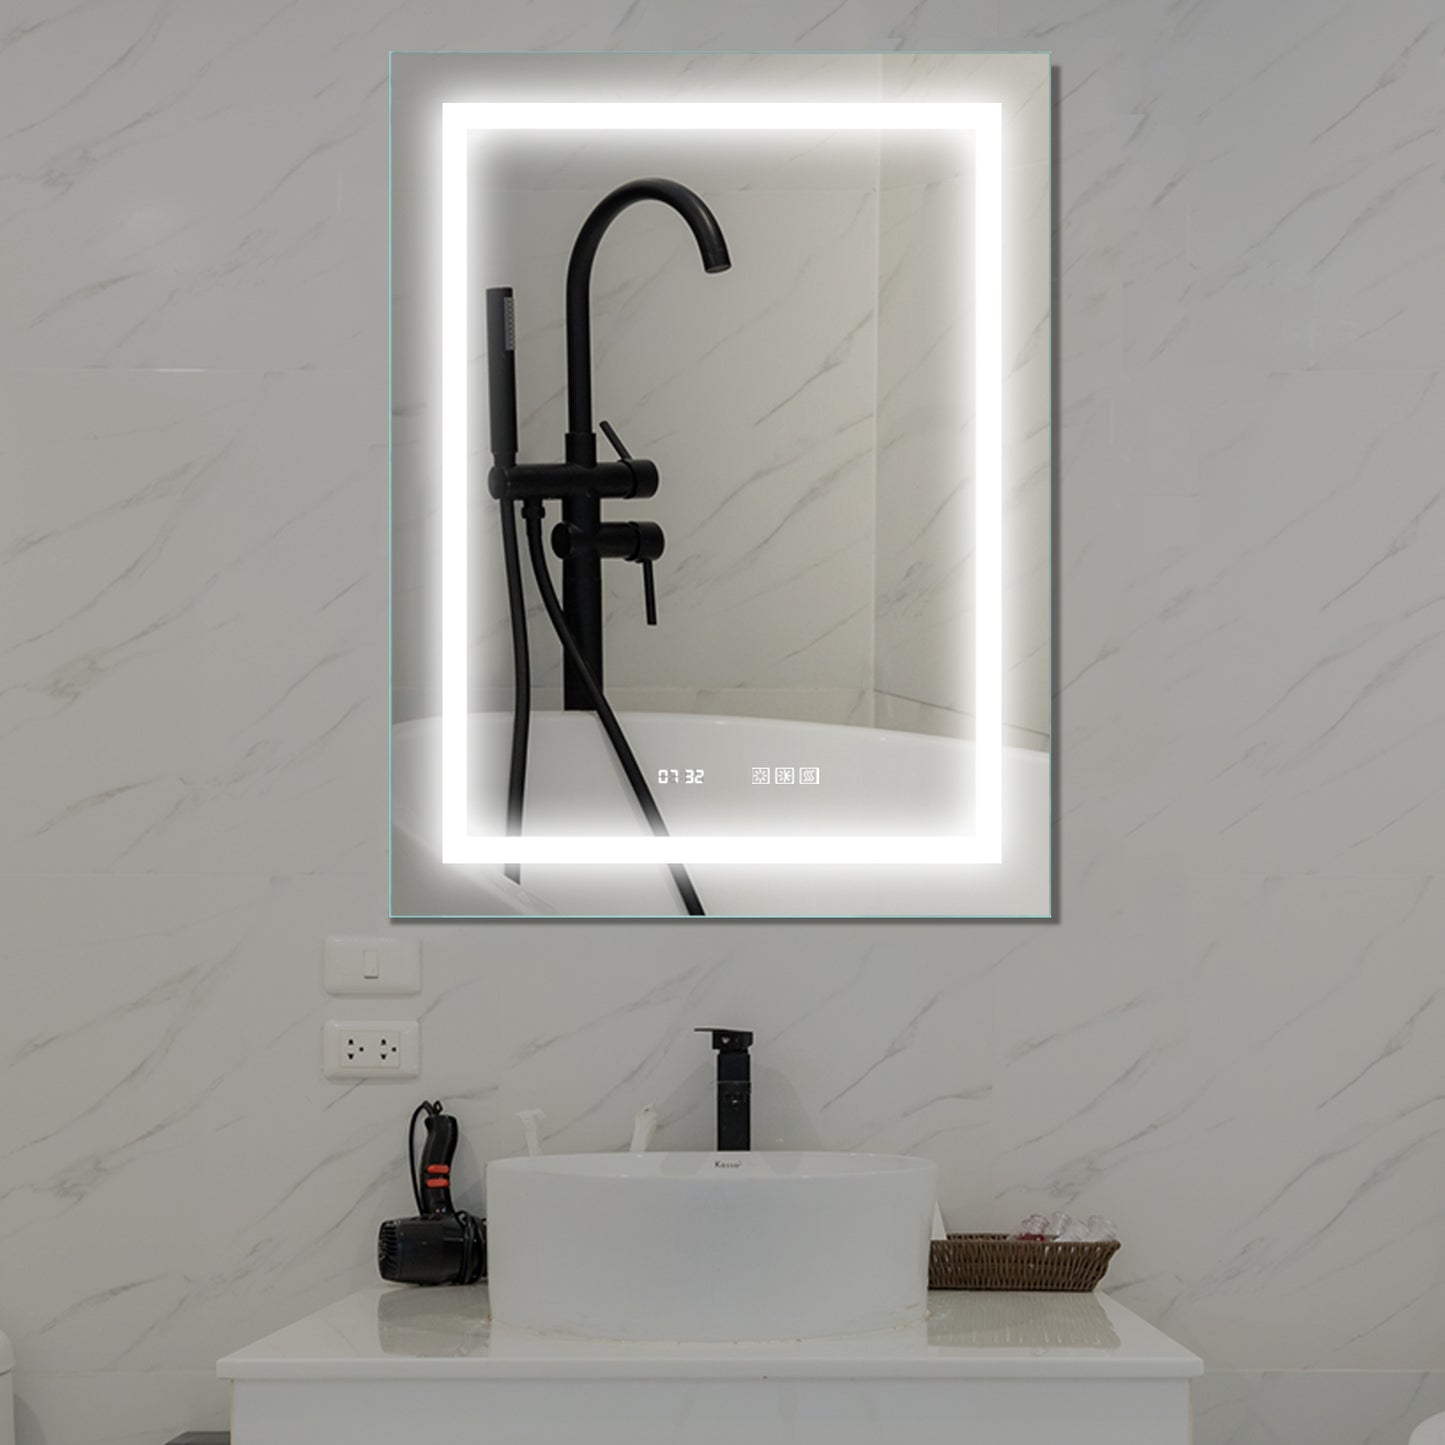 LED Bathroom Vanity Mirror, 36 x 28 inch, Anti Fog, Night Light, Time,Temperature,Dimmable,Color Temper 3000K-6400K,90+ CRI,Vertical Wall Mounted Only